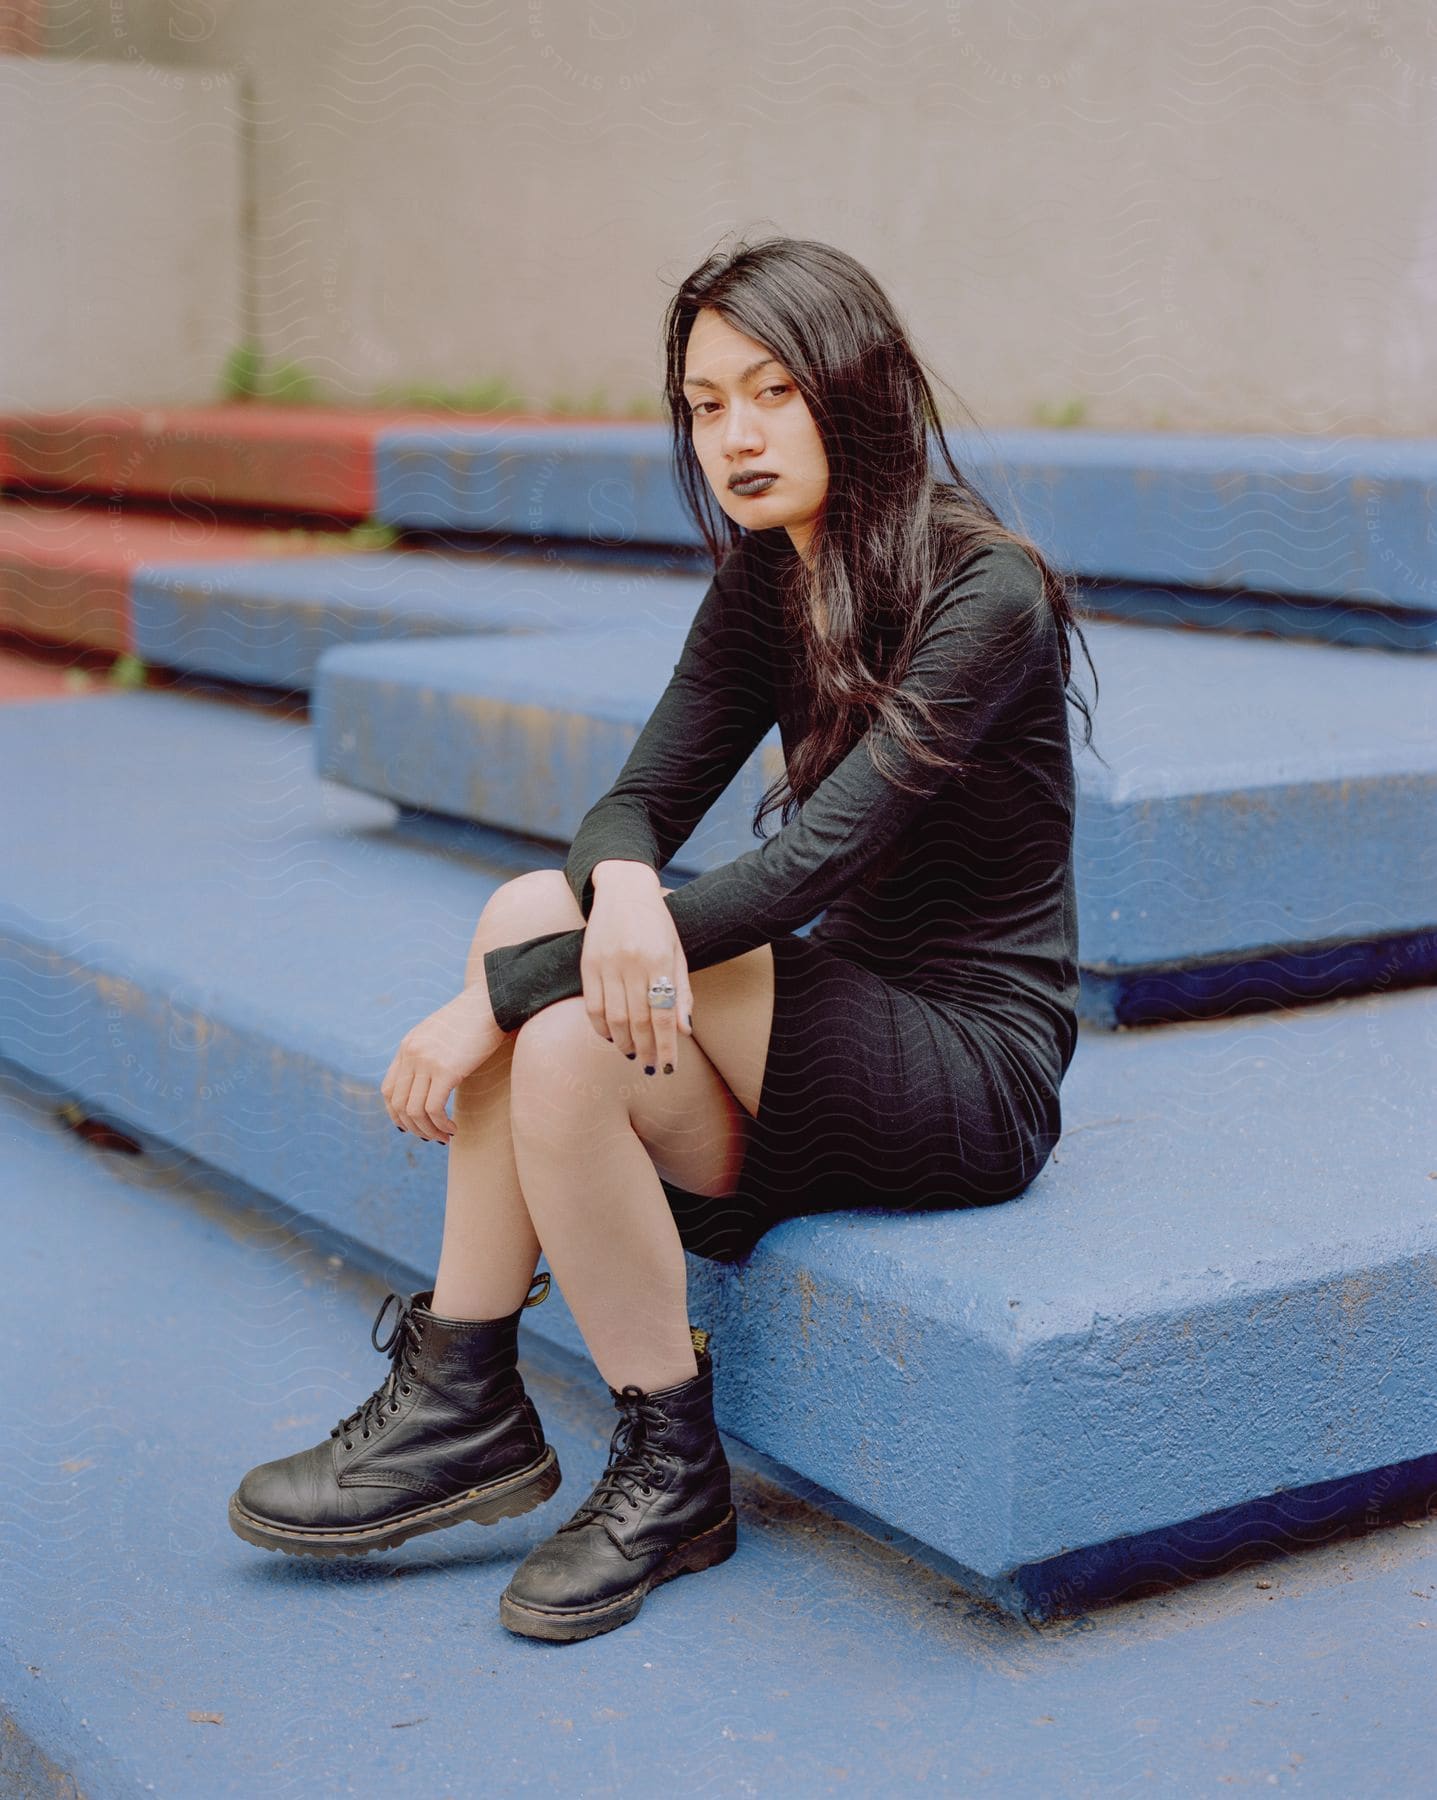 A woman with long brown hair wearing a black dress and black boots sits on blue stairs looking at the camera